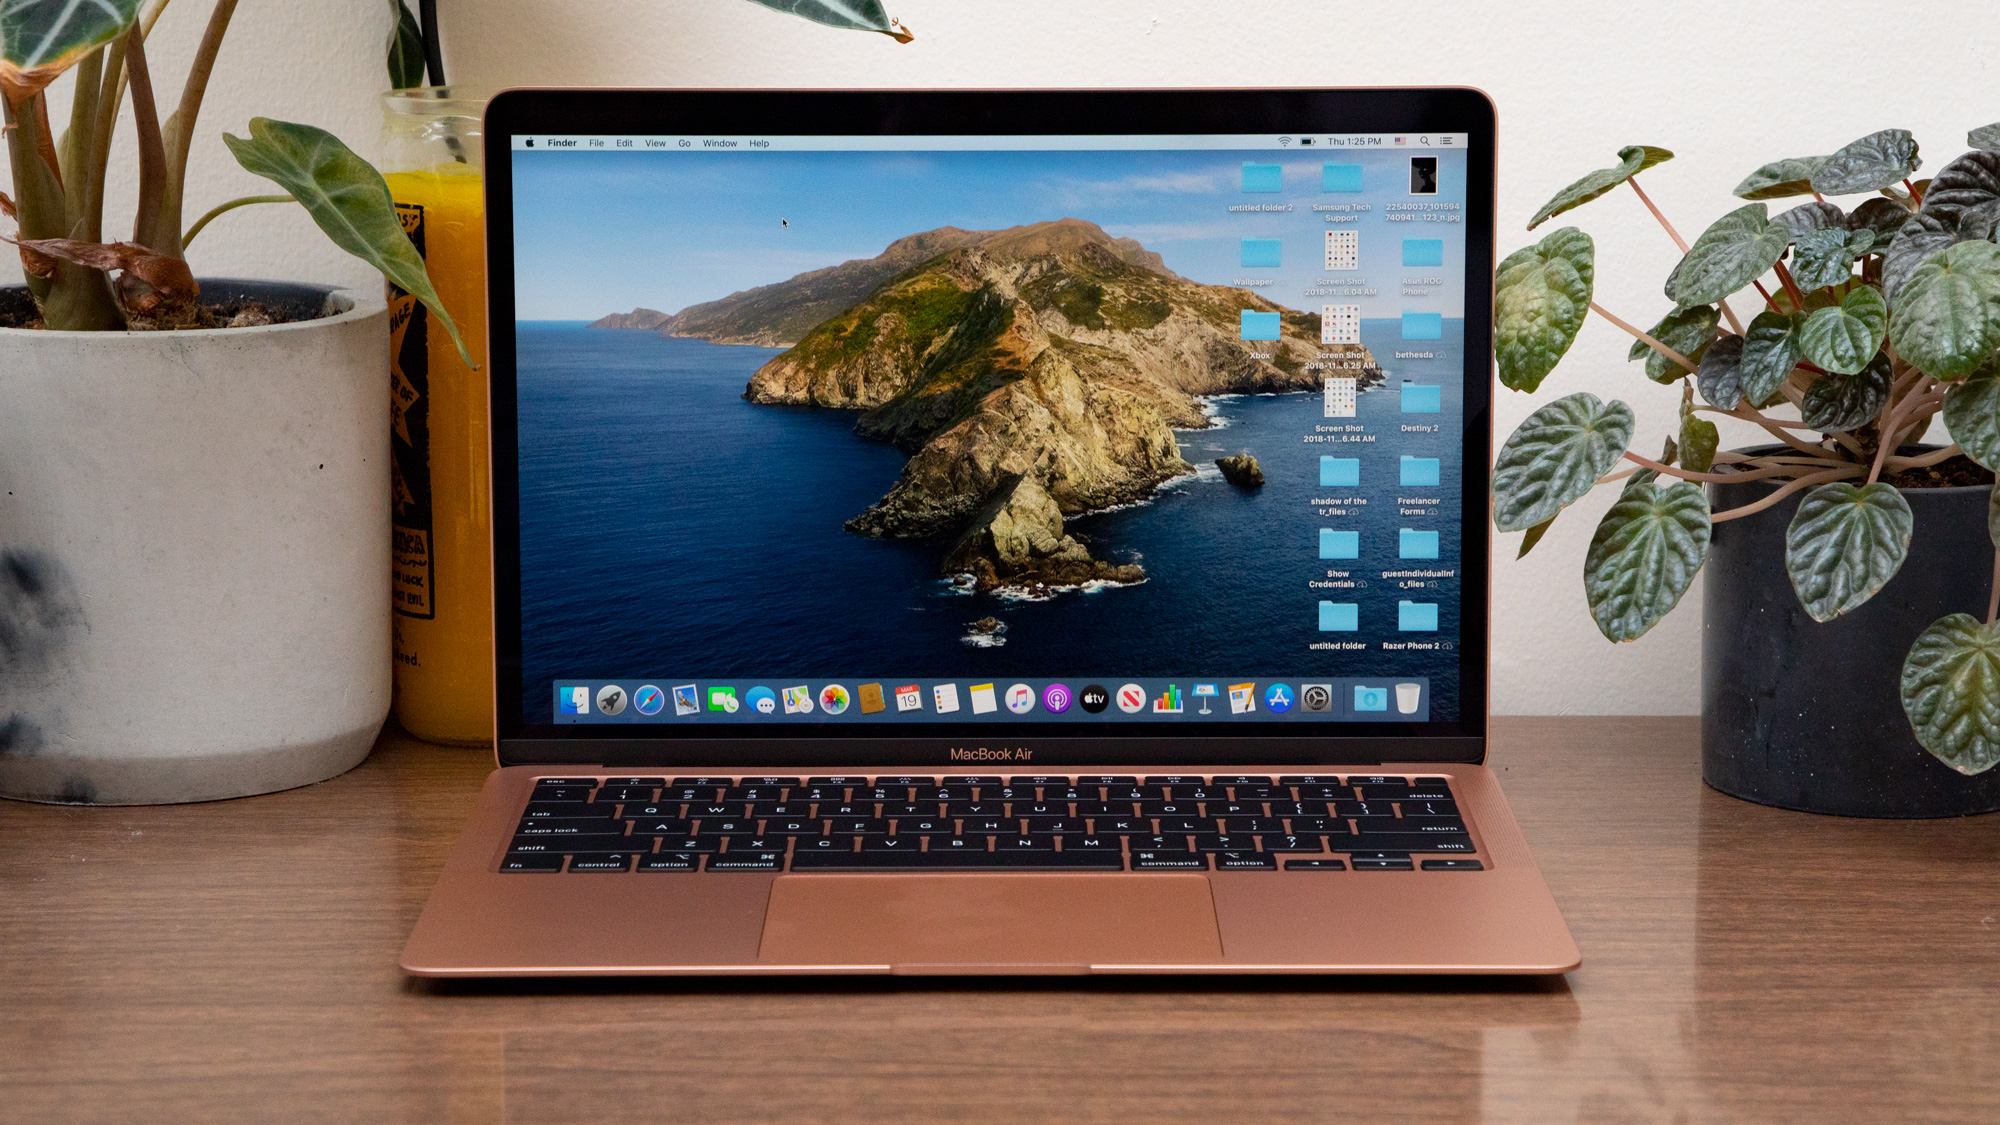 Larger 15-inch MacBook Air is reportedly in the works